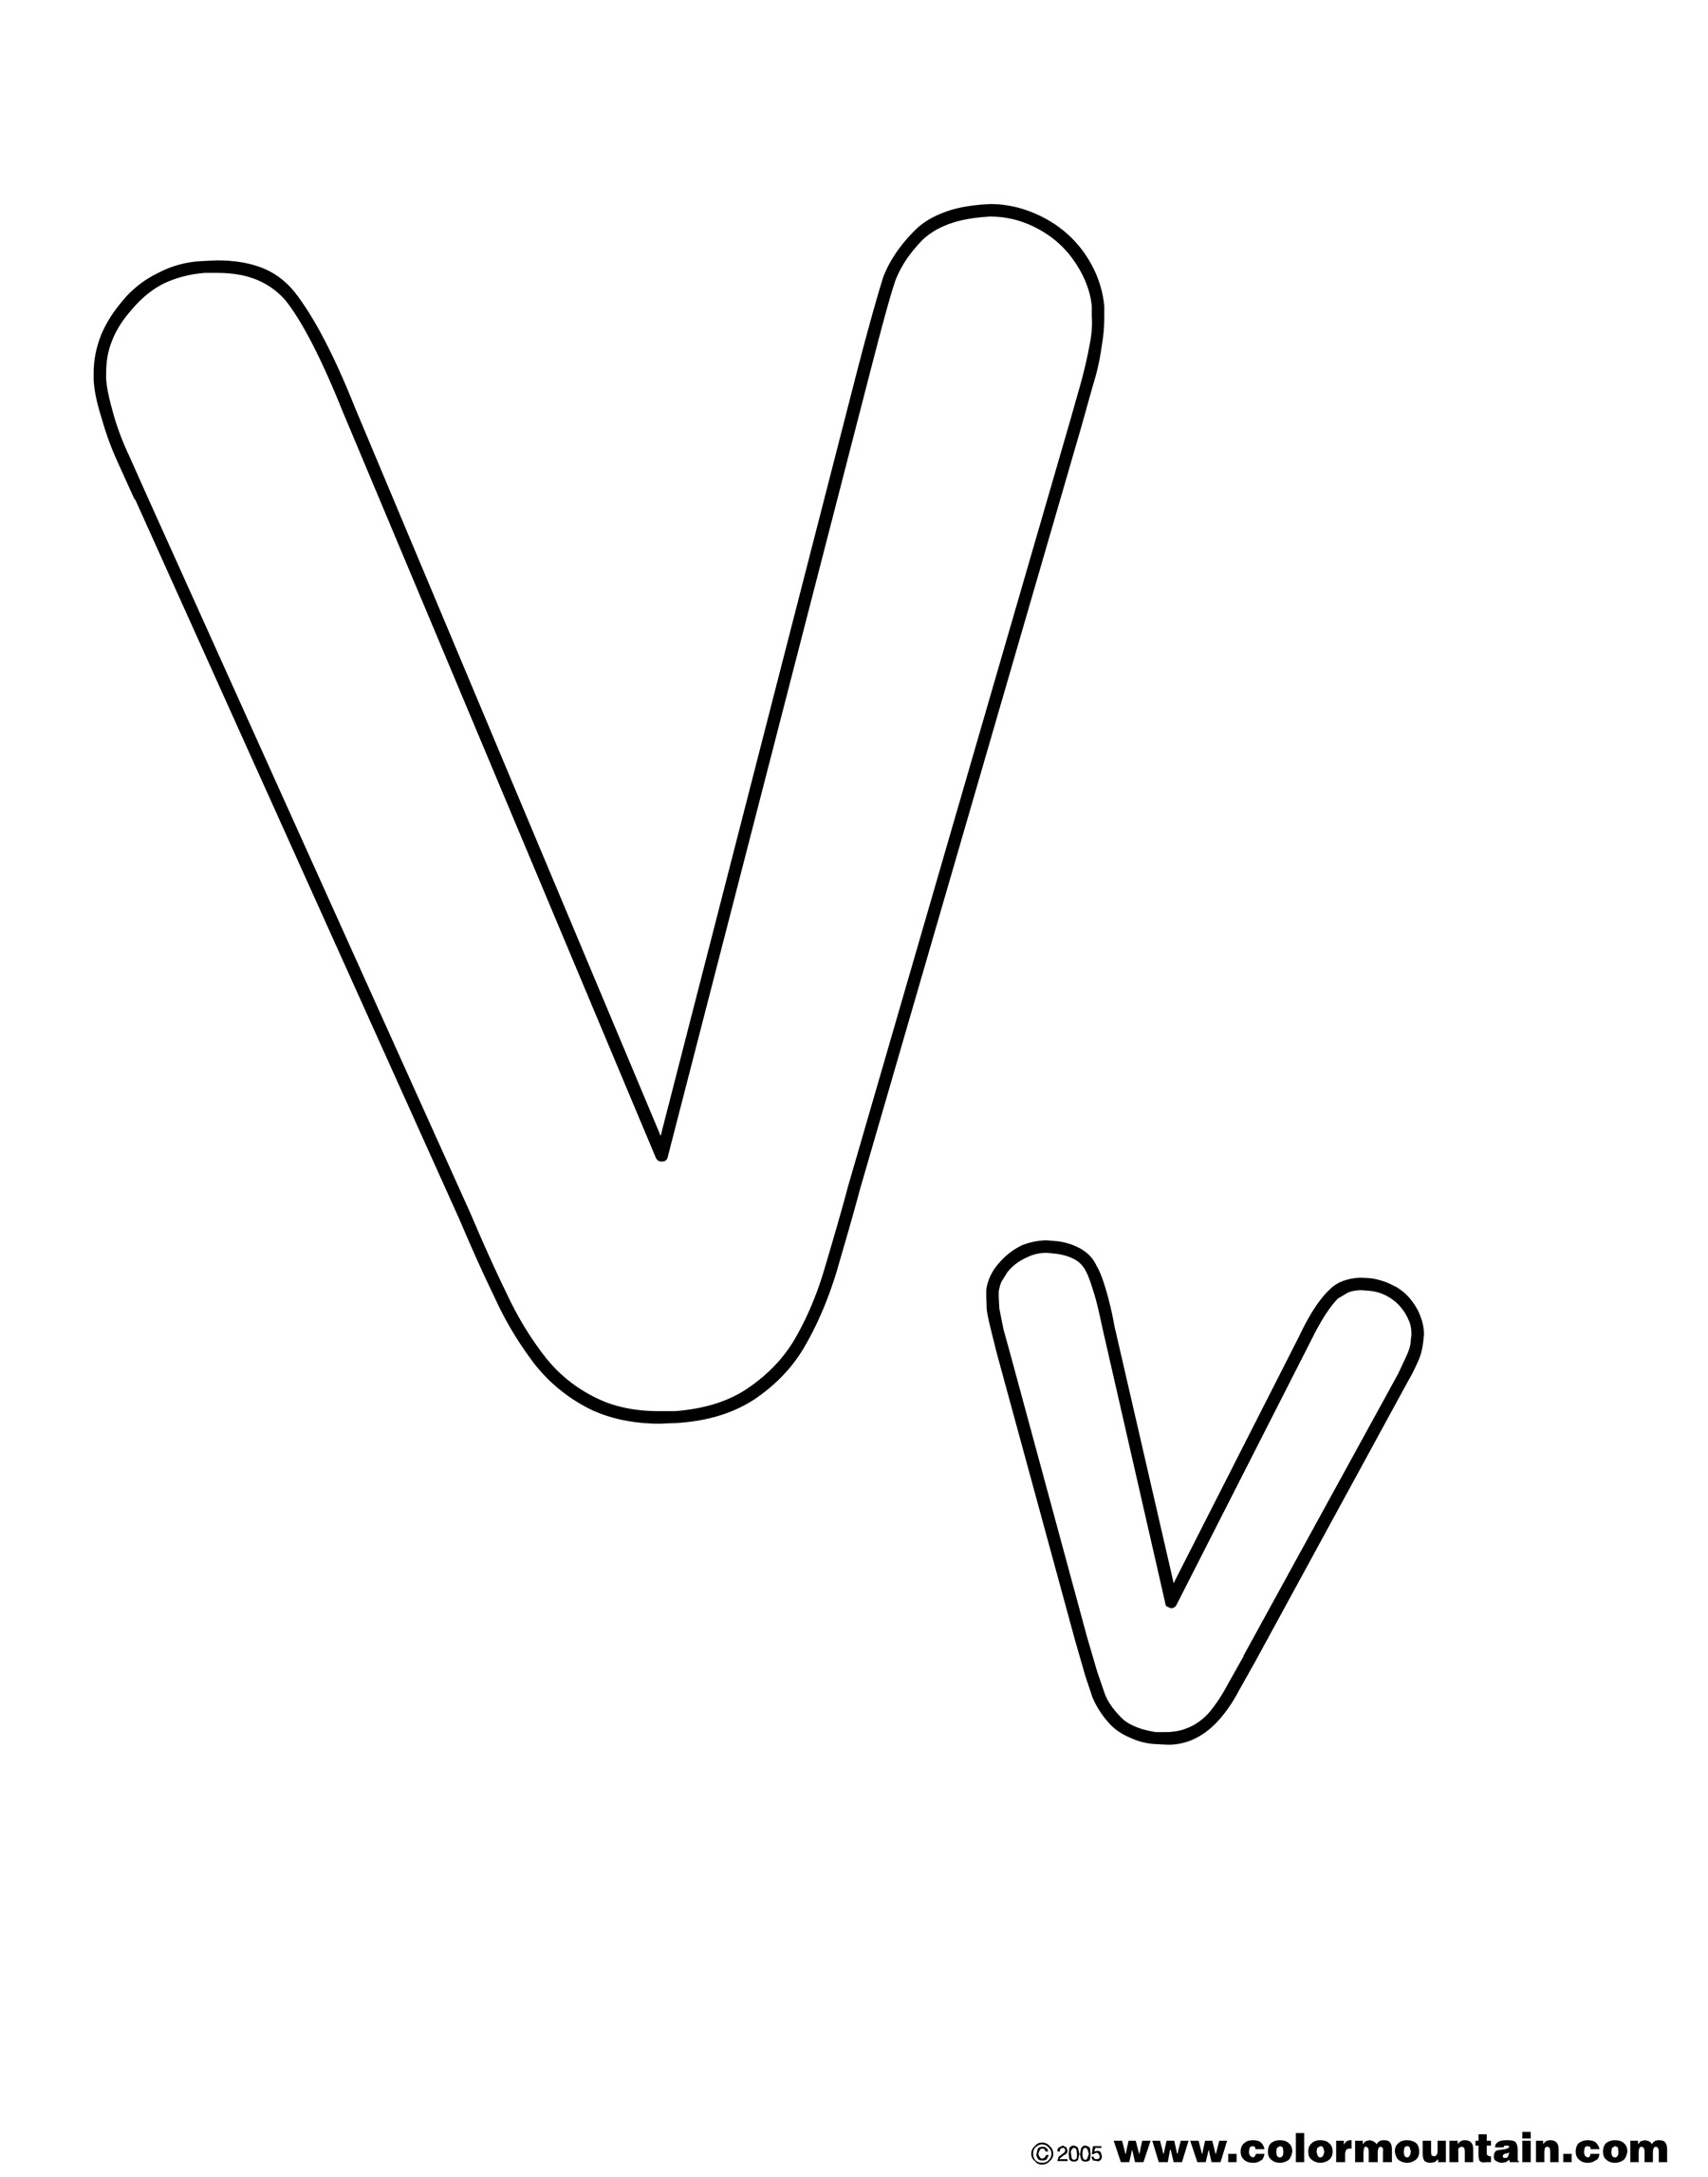 Free Letter V Cliparts, Download Free Clip Art, Free Clip.